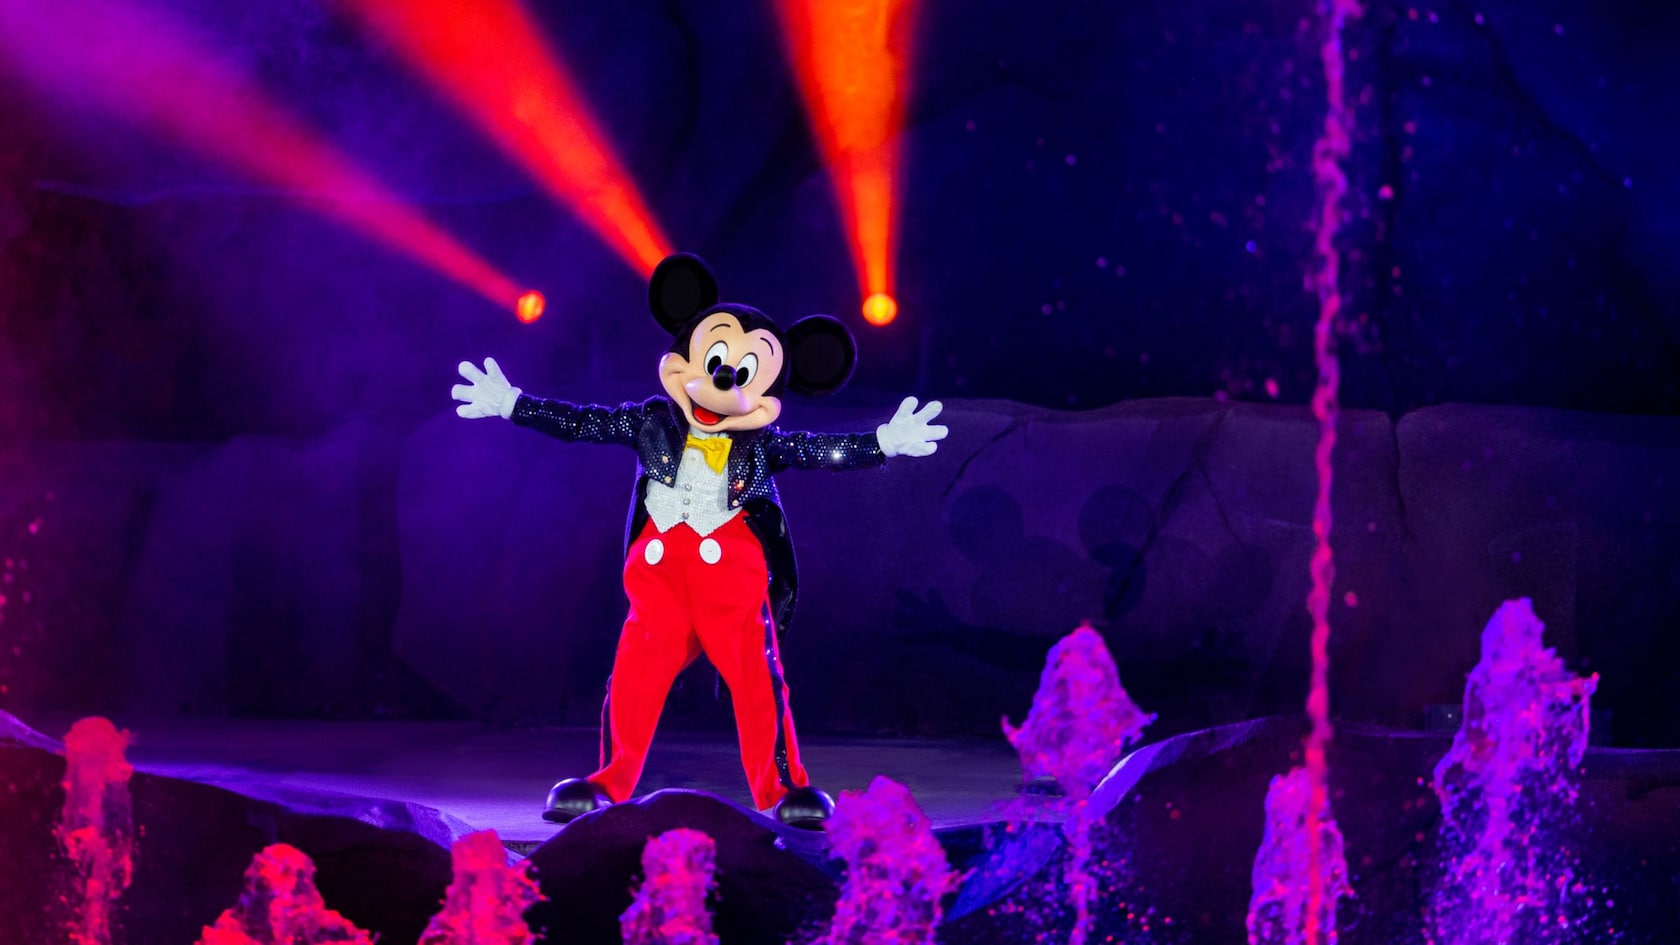 Mickey Mouse stands on a stage near water jets